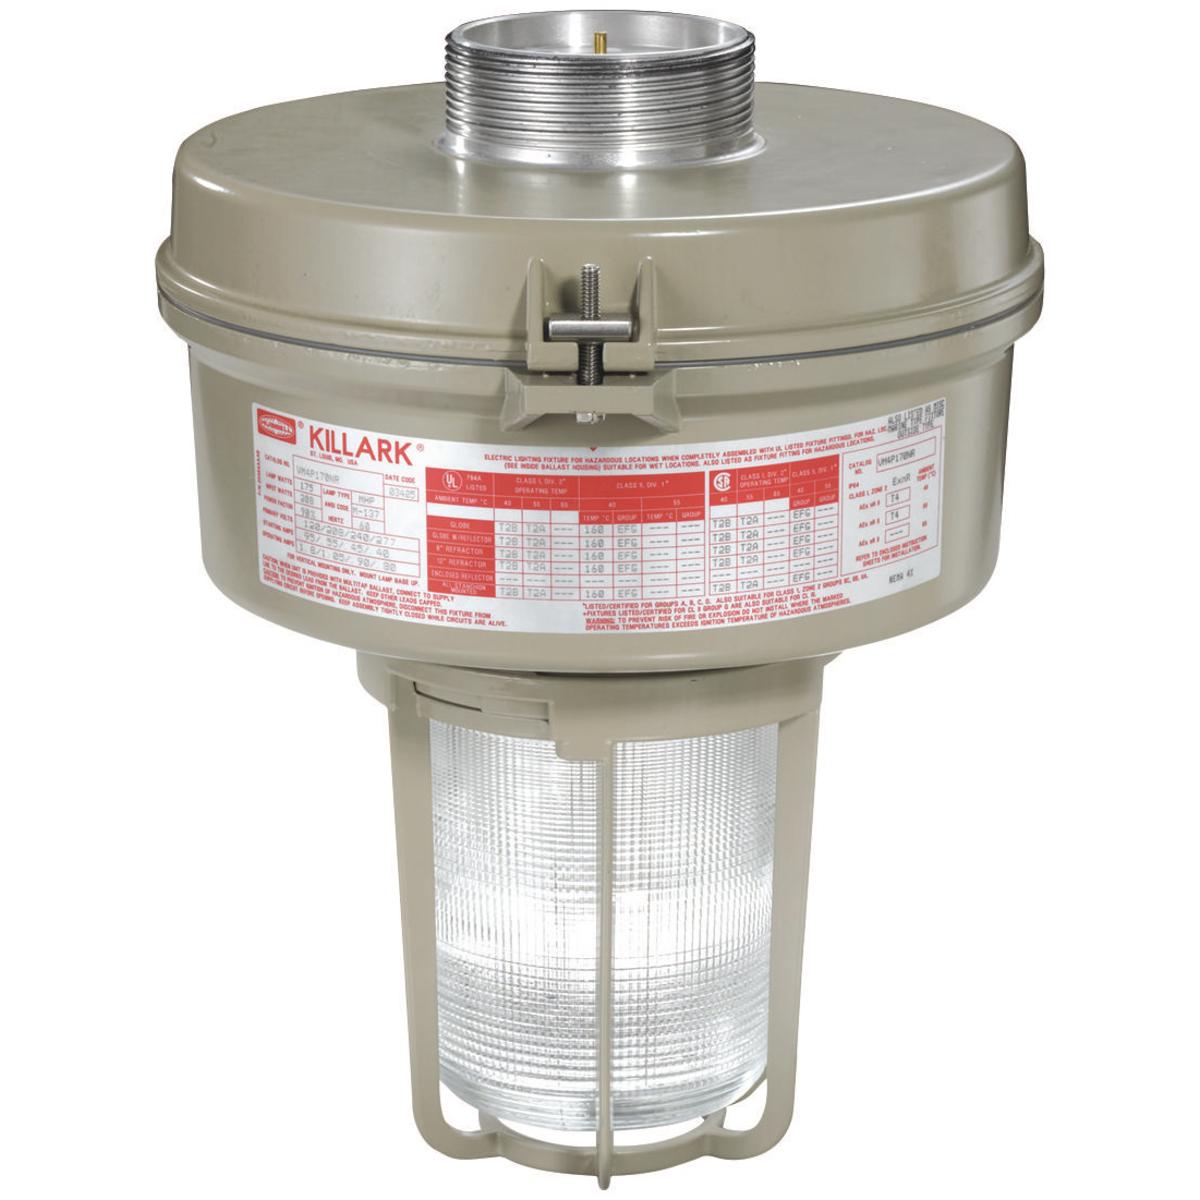 Hubbell VM3S070EZGLG VM3 Series - 70W High Pressure Sodium Quadri-Volt - EZ Mount Adapter -  Globe and Guard  ; Ballast tank and splice box – corrosion resistant copper-free aluminum alloy with baked powder epoxy/polyester finish, electrostatically applied for complete, unifo